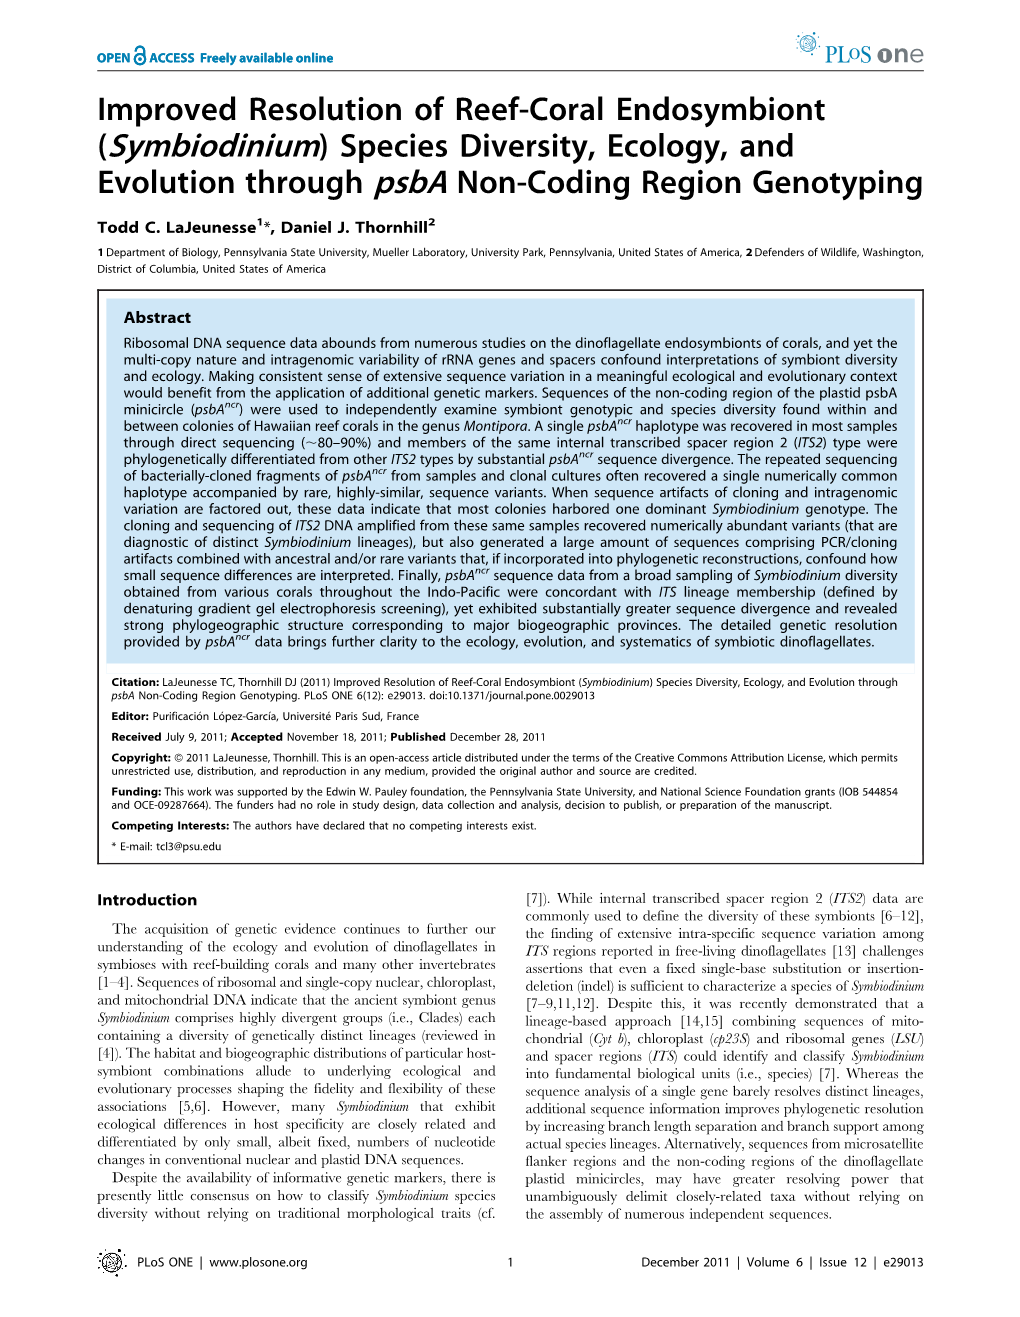 Improved Resolution of Reef-Coral Endosymbiont (Symbiodinium) Species Diversity, Ecology, and Evolution Through Psba Non-Coding Region Genotyping